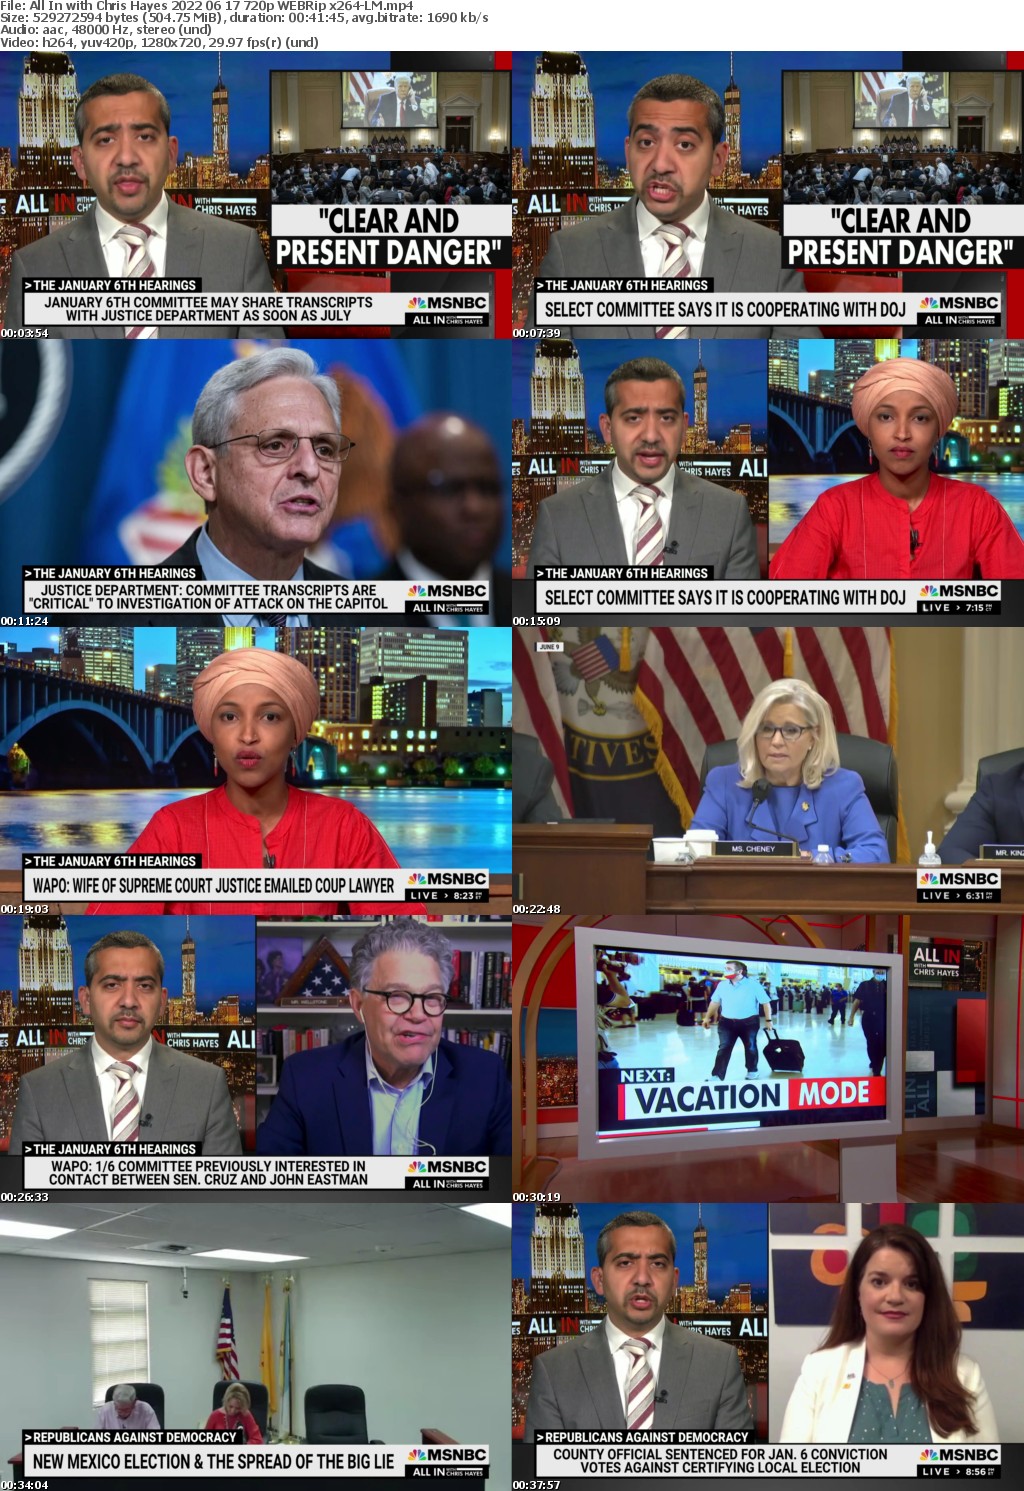 All In with Chris Hayes 2022 06 17 720p WEBRip x264-LM